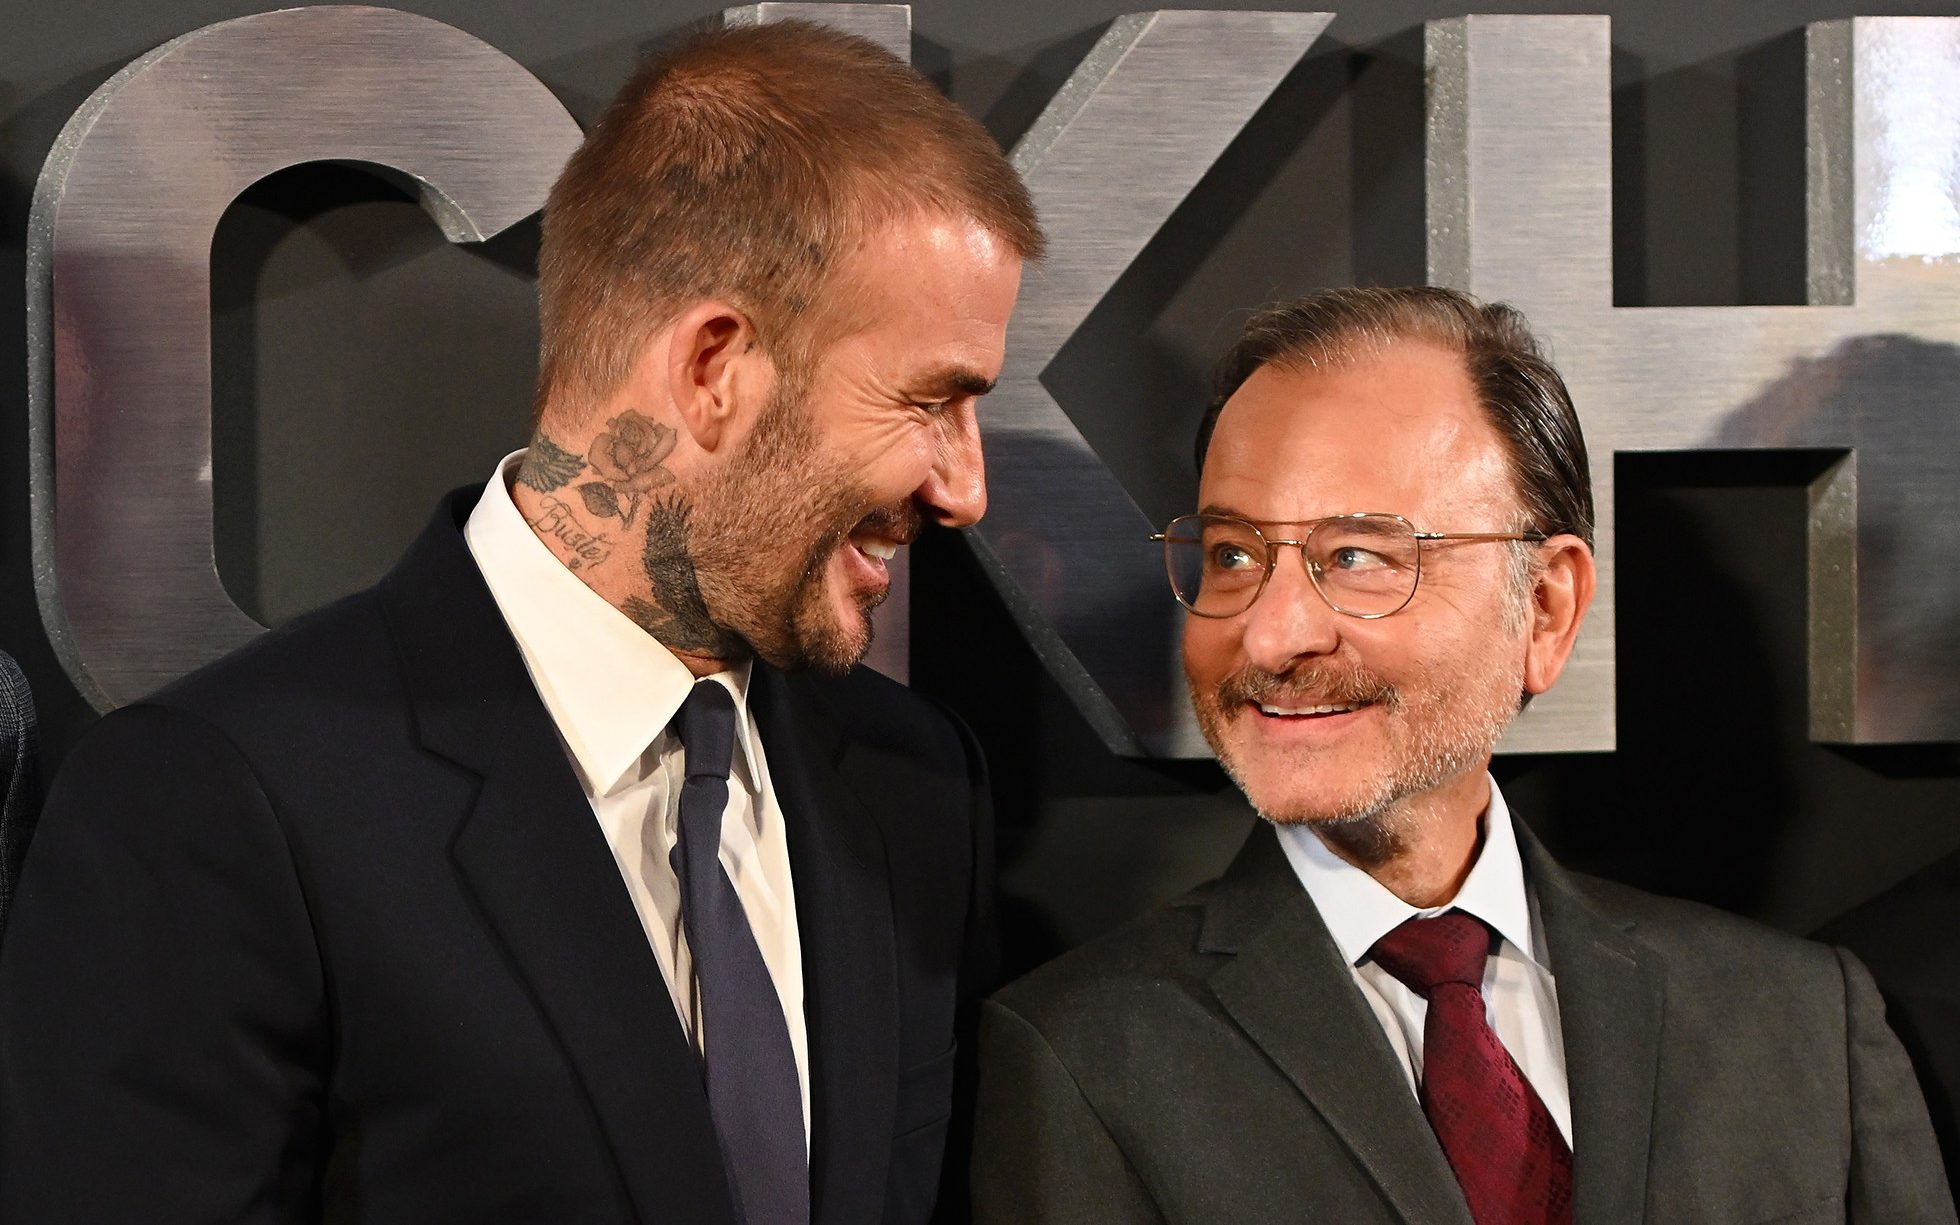 david beckham says documentary director was ‘angry’ over viral ‘be honest’ scene